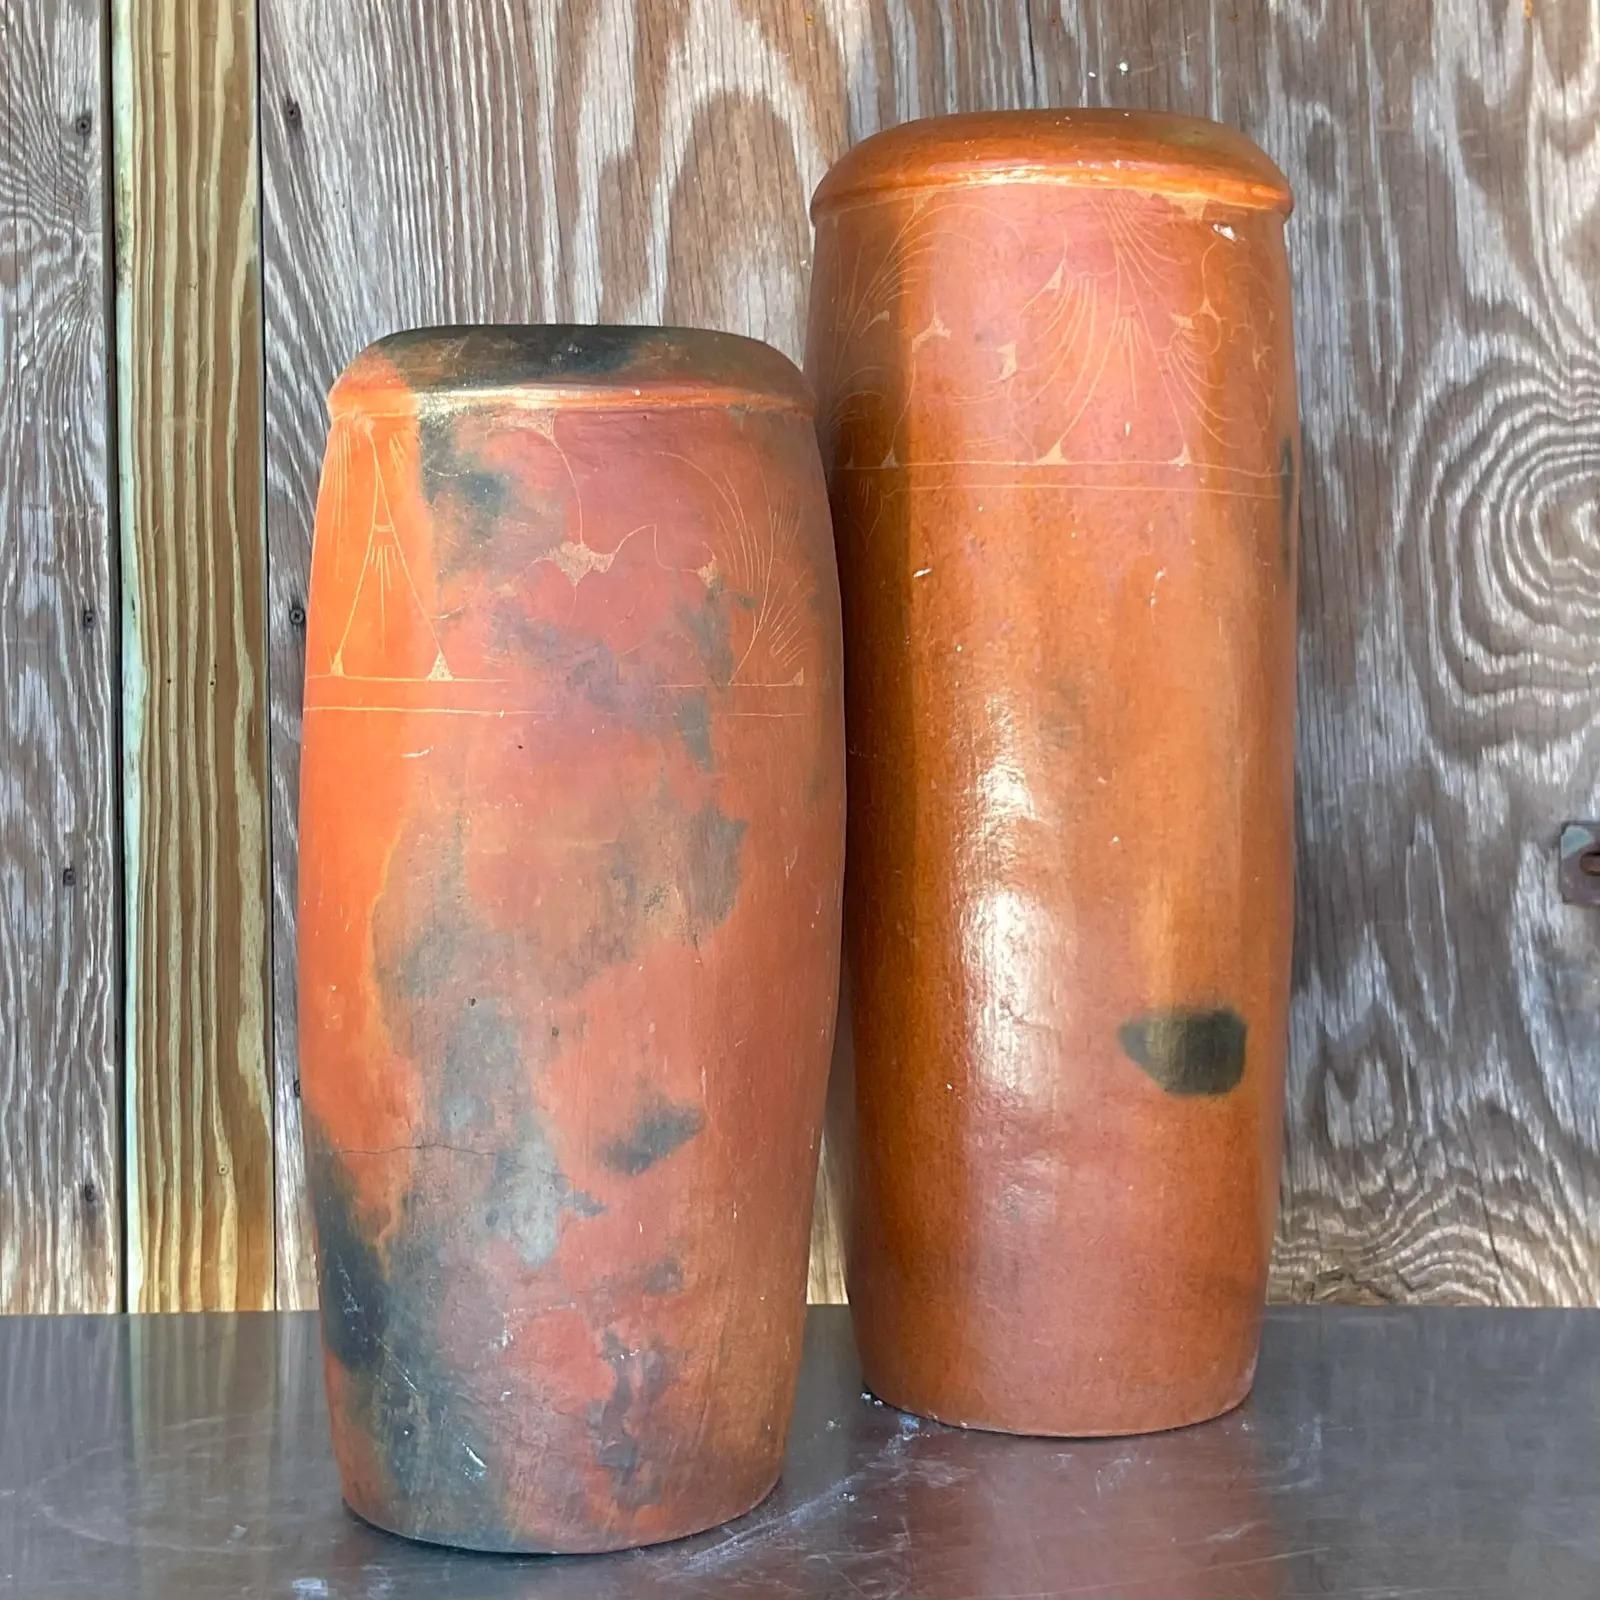 North American Vintage Boho Etched Terracotta Vases - a Pair For Sale